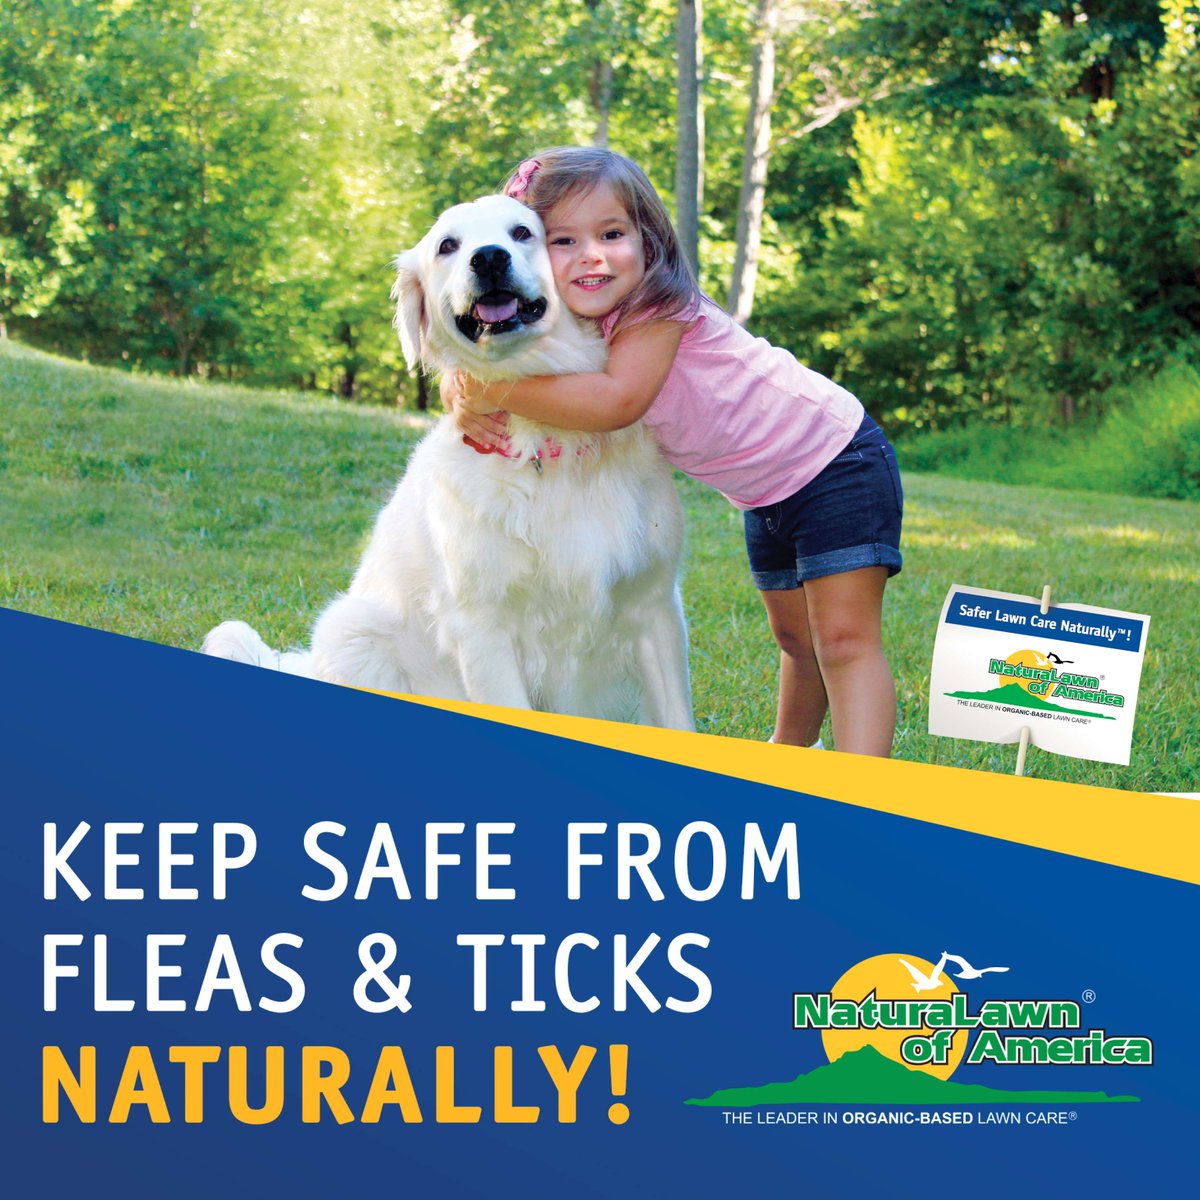 Be bite-free this Memorial Day! Regularly treating your yard for fleas and ticks helps protect from contracting Lyme Disease carried by these pests. We can help: naturalawn.com/free-price-quo… #NaturaLawn #NLA #PetFriendly #Pest #FleaAndTick #LymeDisease